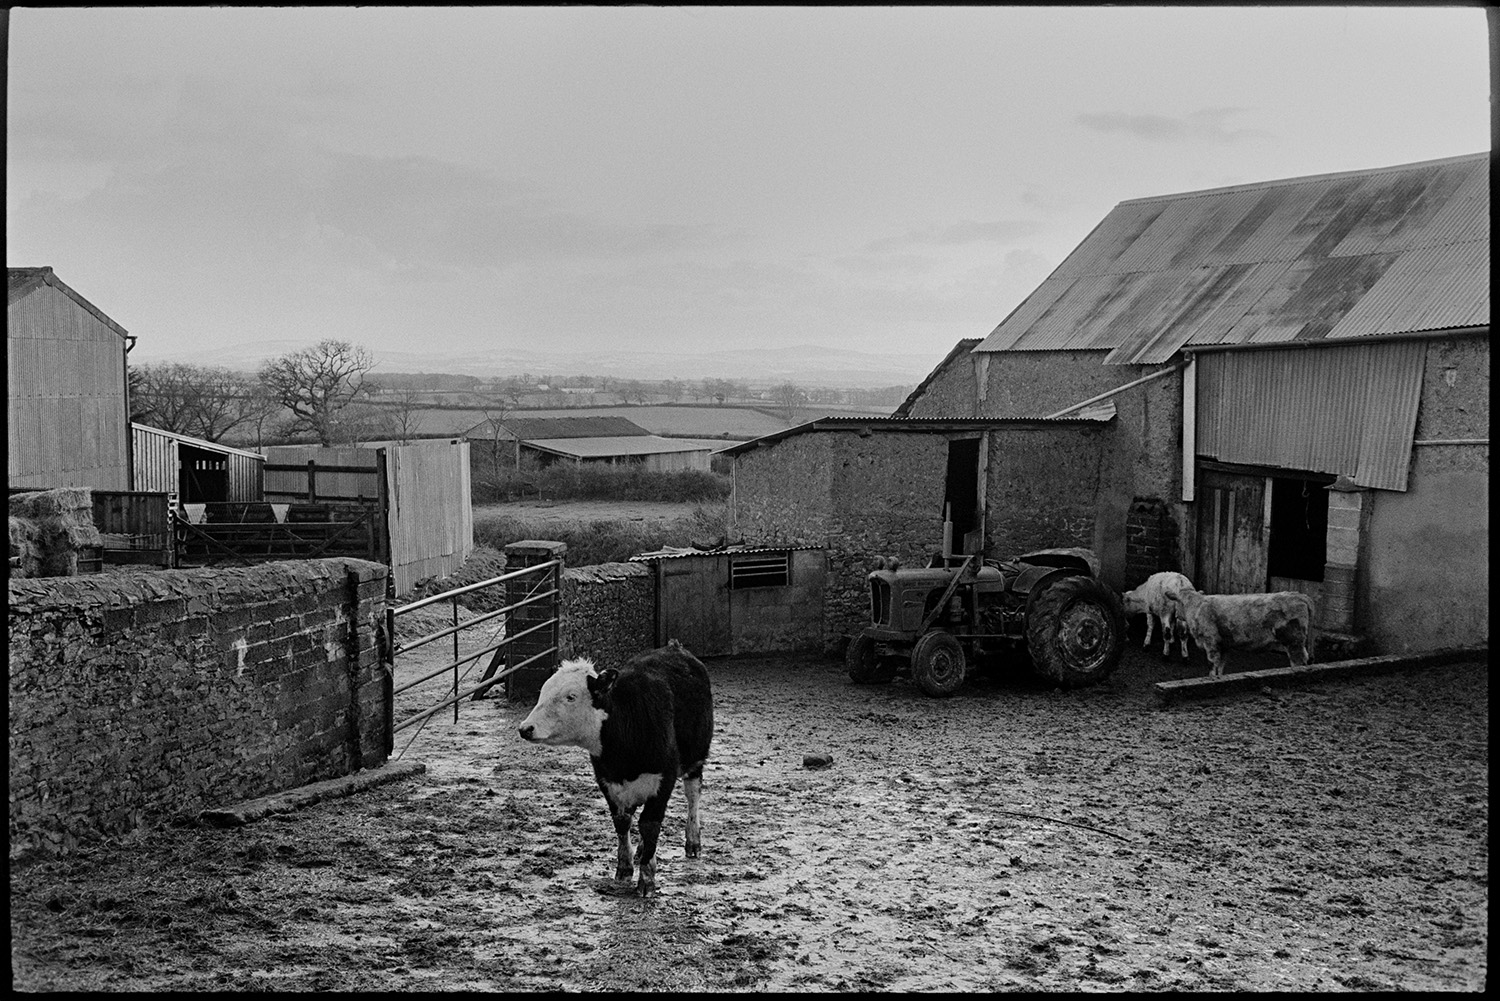 Muddy farmyard with cattle and cob barn.
[Cattle in a muddy farmyard with a tractor and a cob barn with a corrugated iron roof, at Ingleigh Green.]